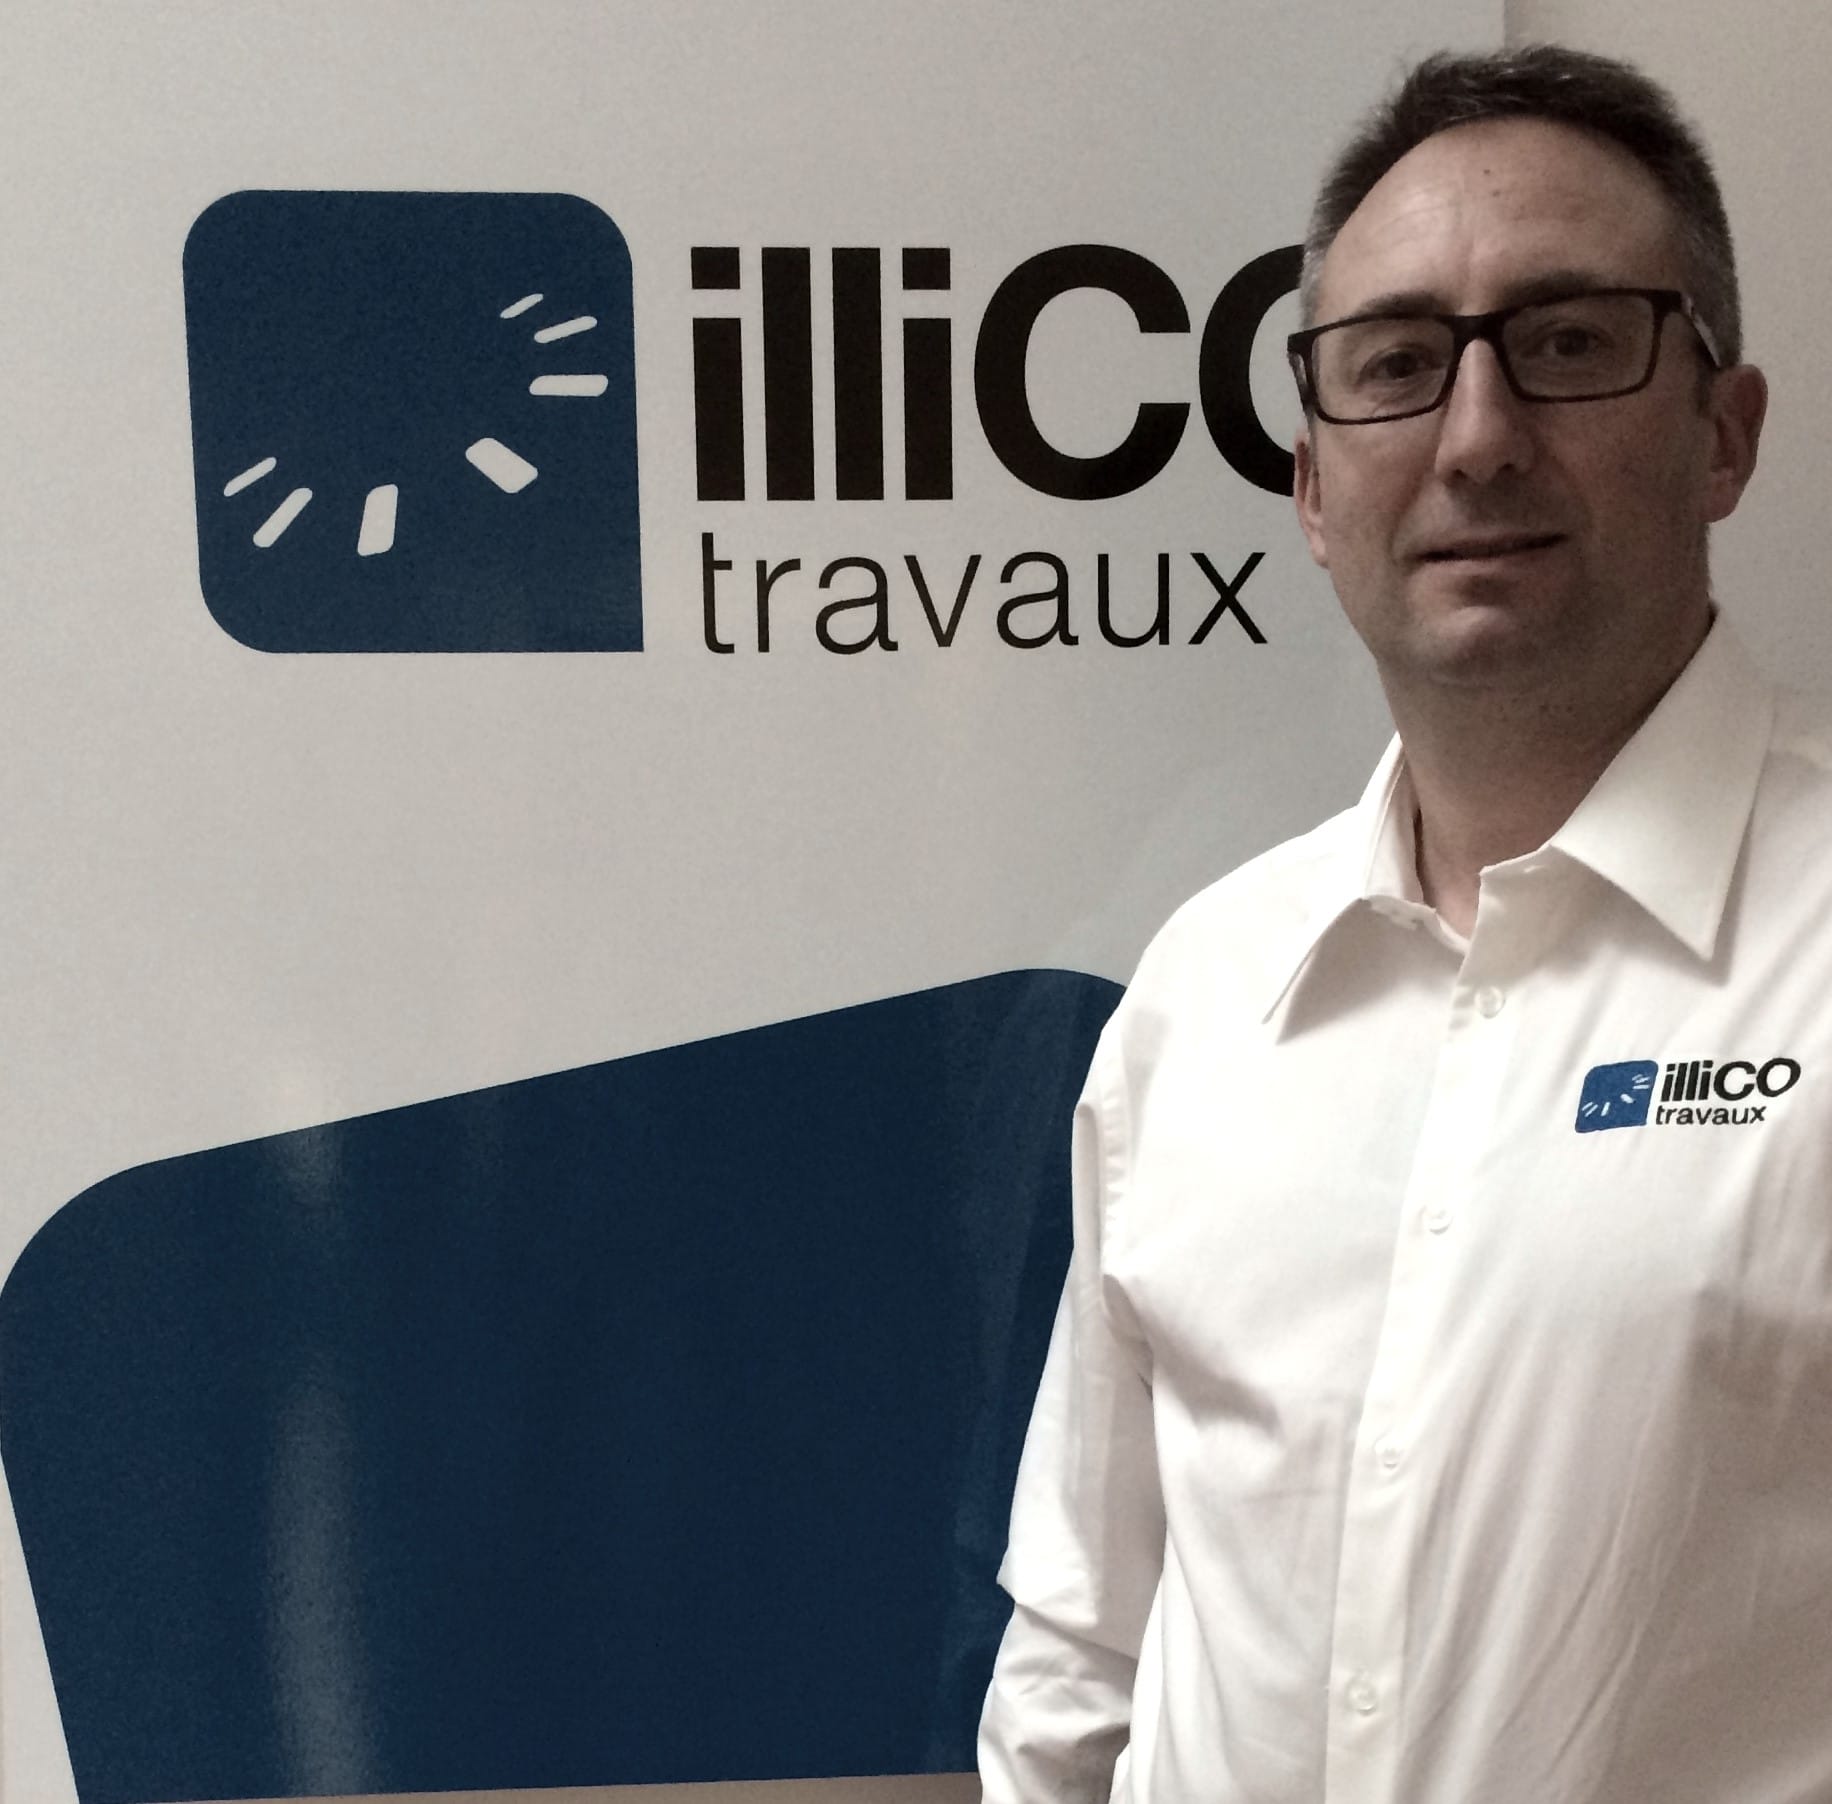 illiCO travaux Lille Nord Ouest